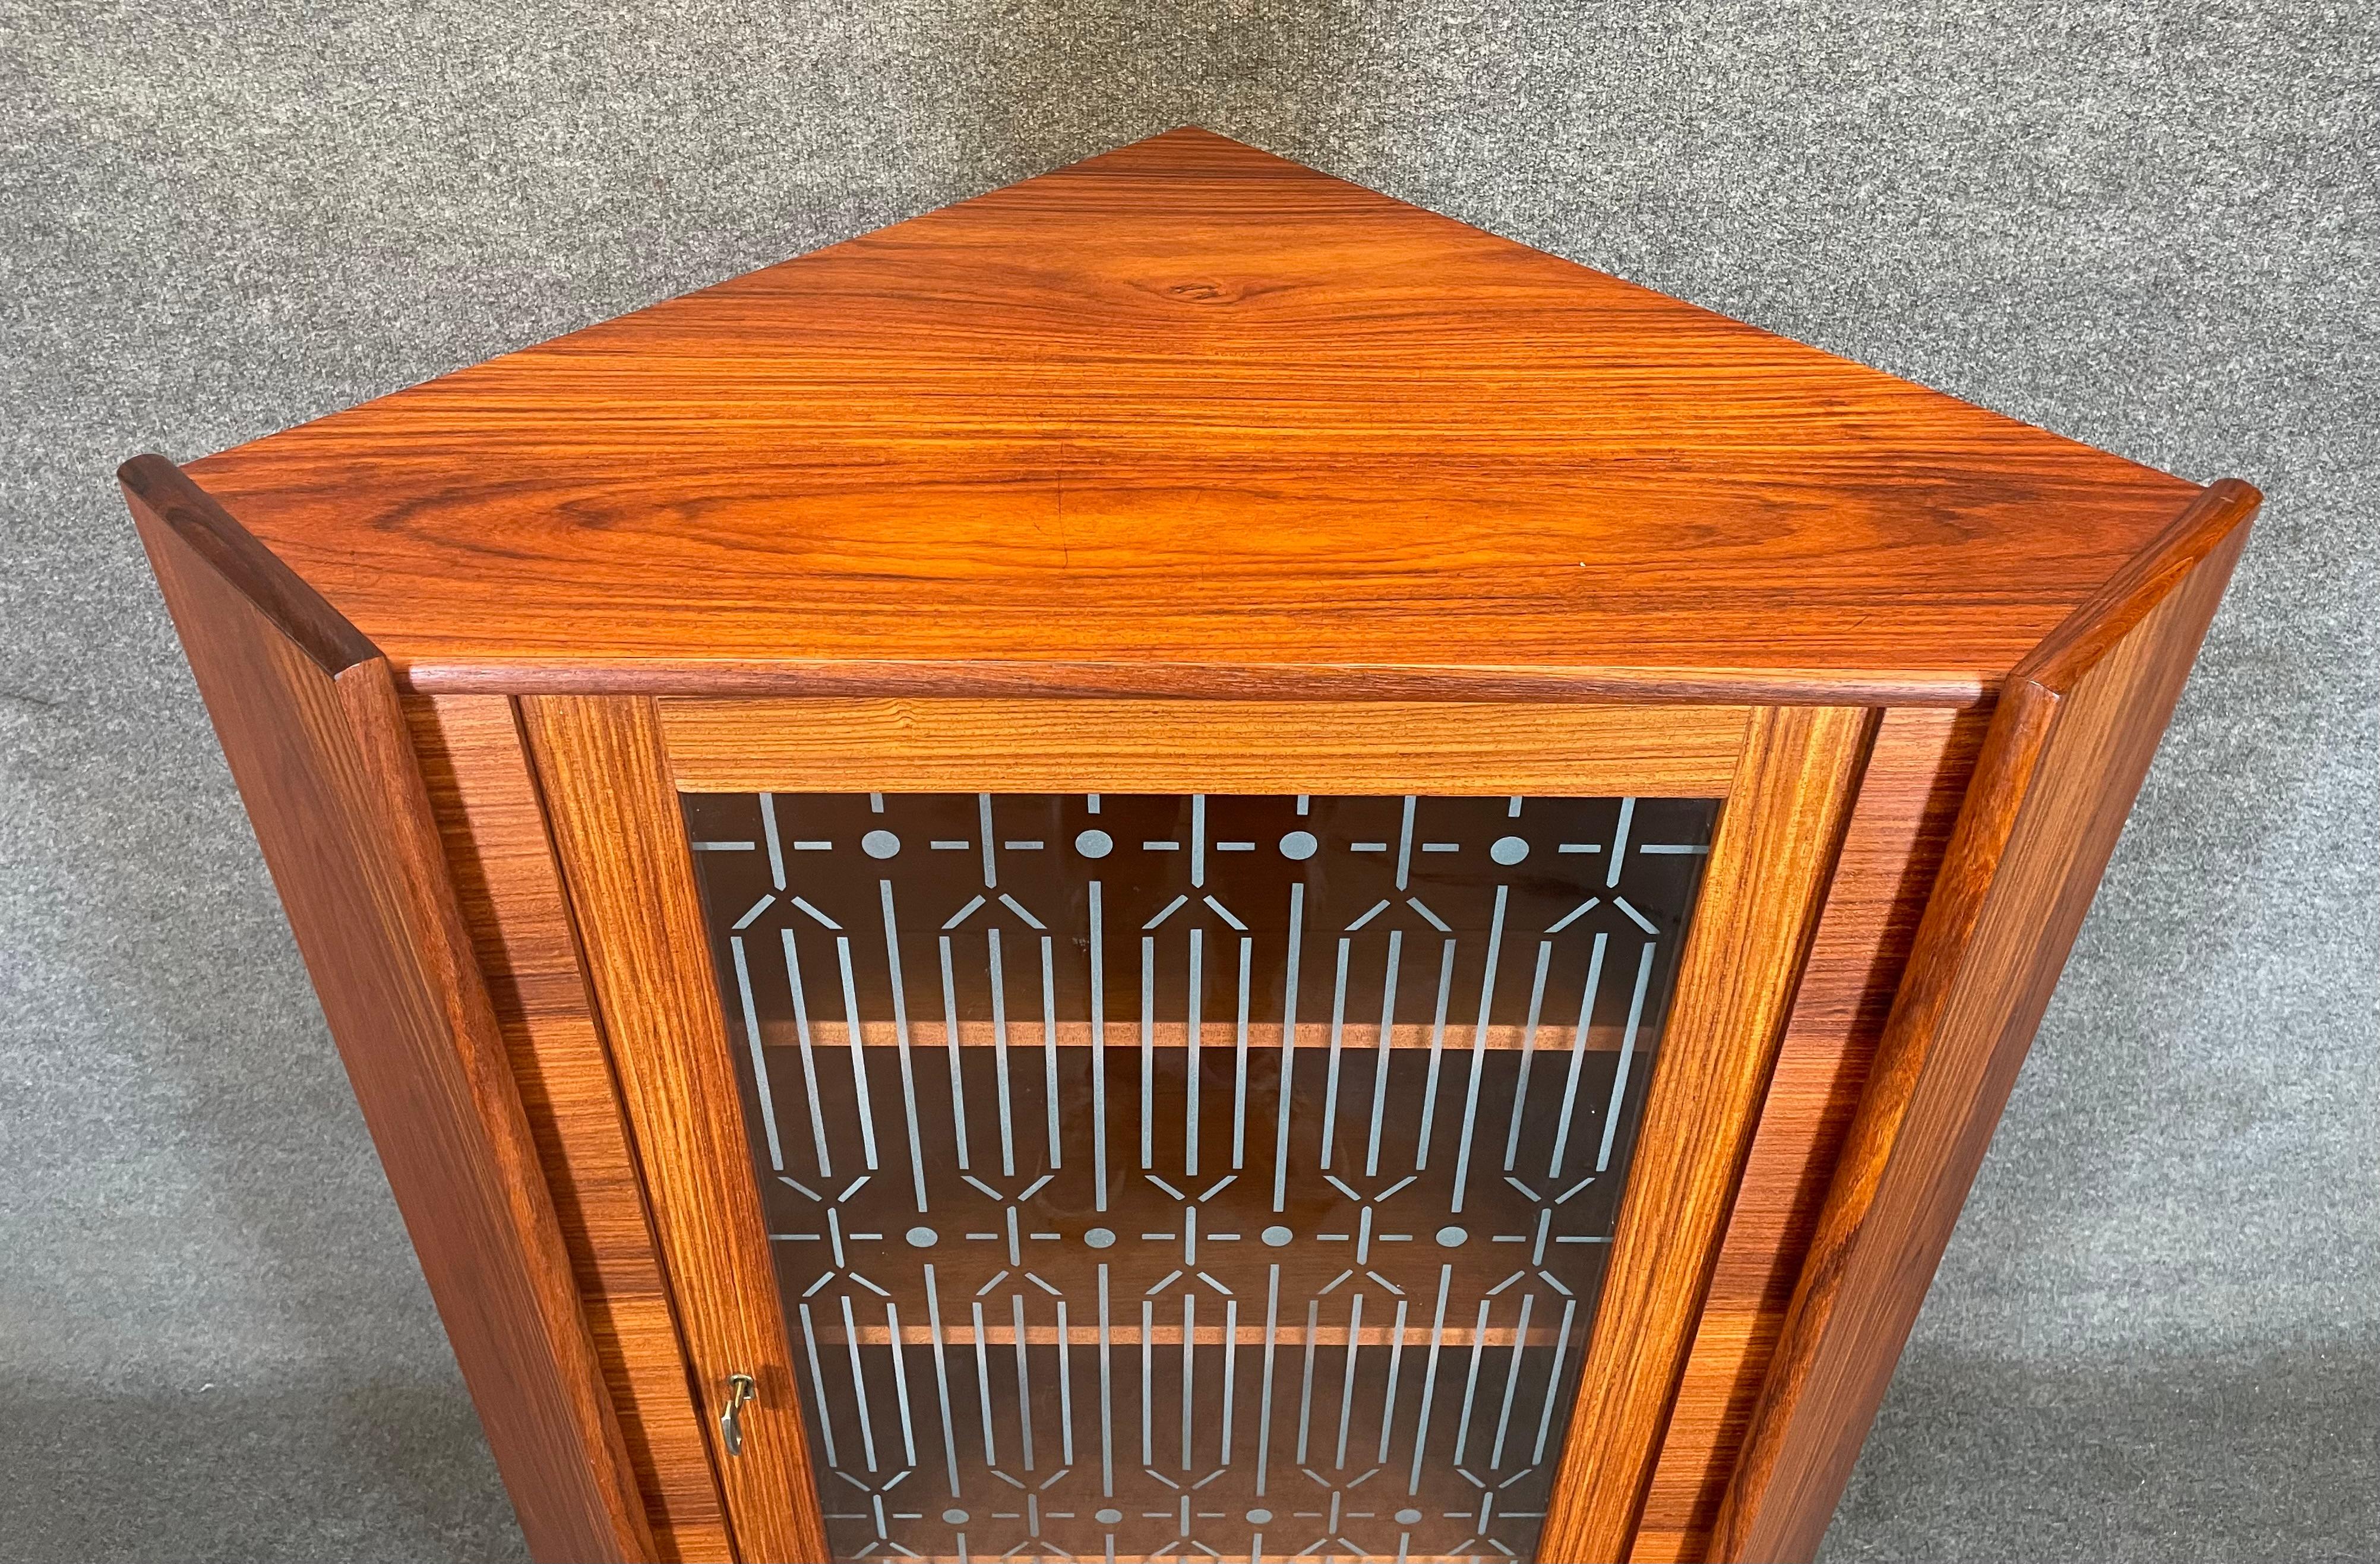 Here is a beautiful vintage corner cabinet in rosewood with a retro pattern etched glass recently imported from Europe to California.
This cabinet was manufactured in the late 1950's in Denmark and is attributed to Omann Jun.
It features a set of